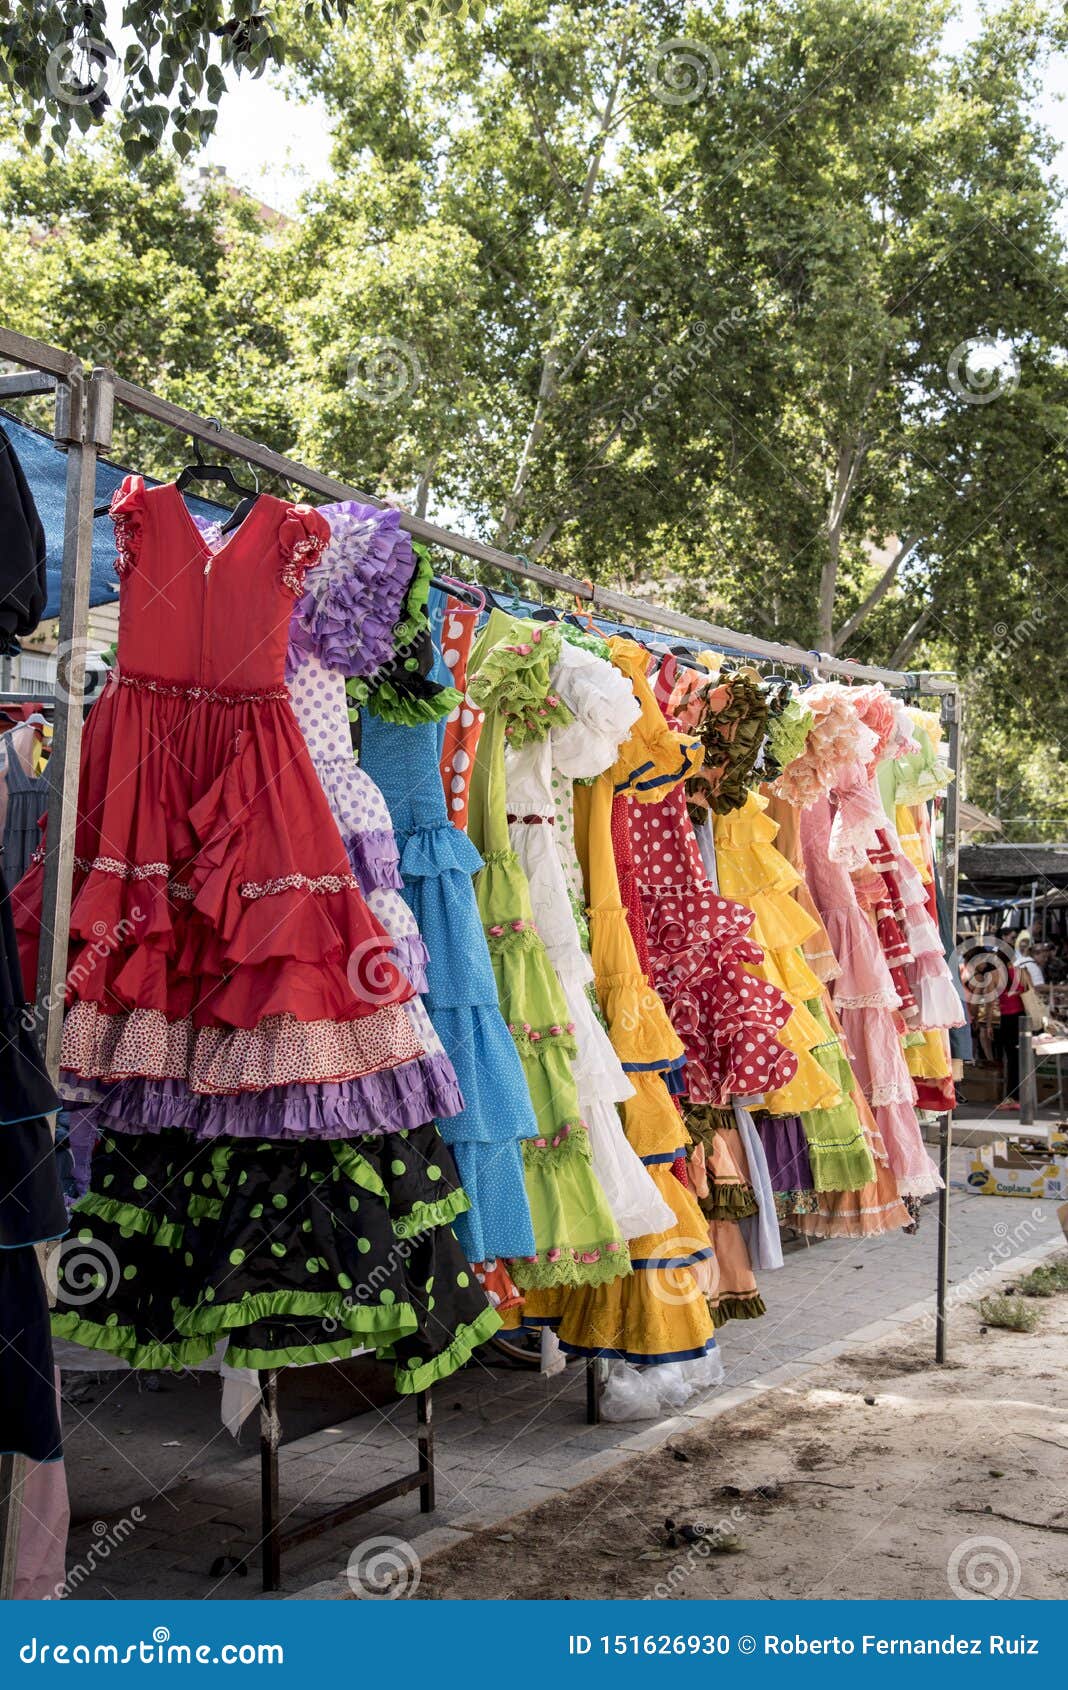 colorful sevillana costumes at a street market in spain